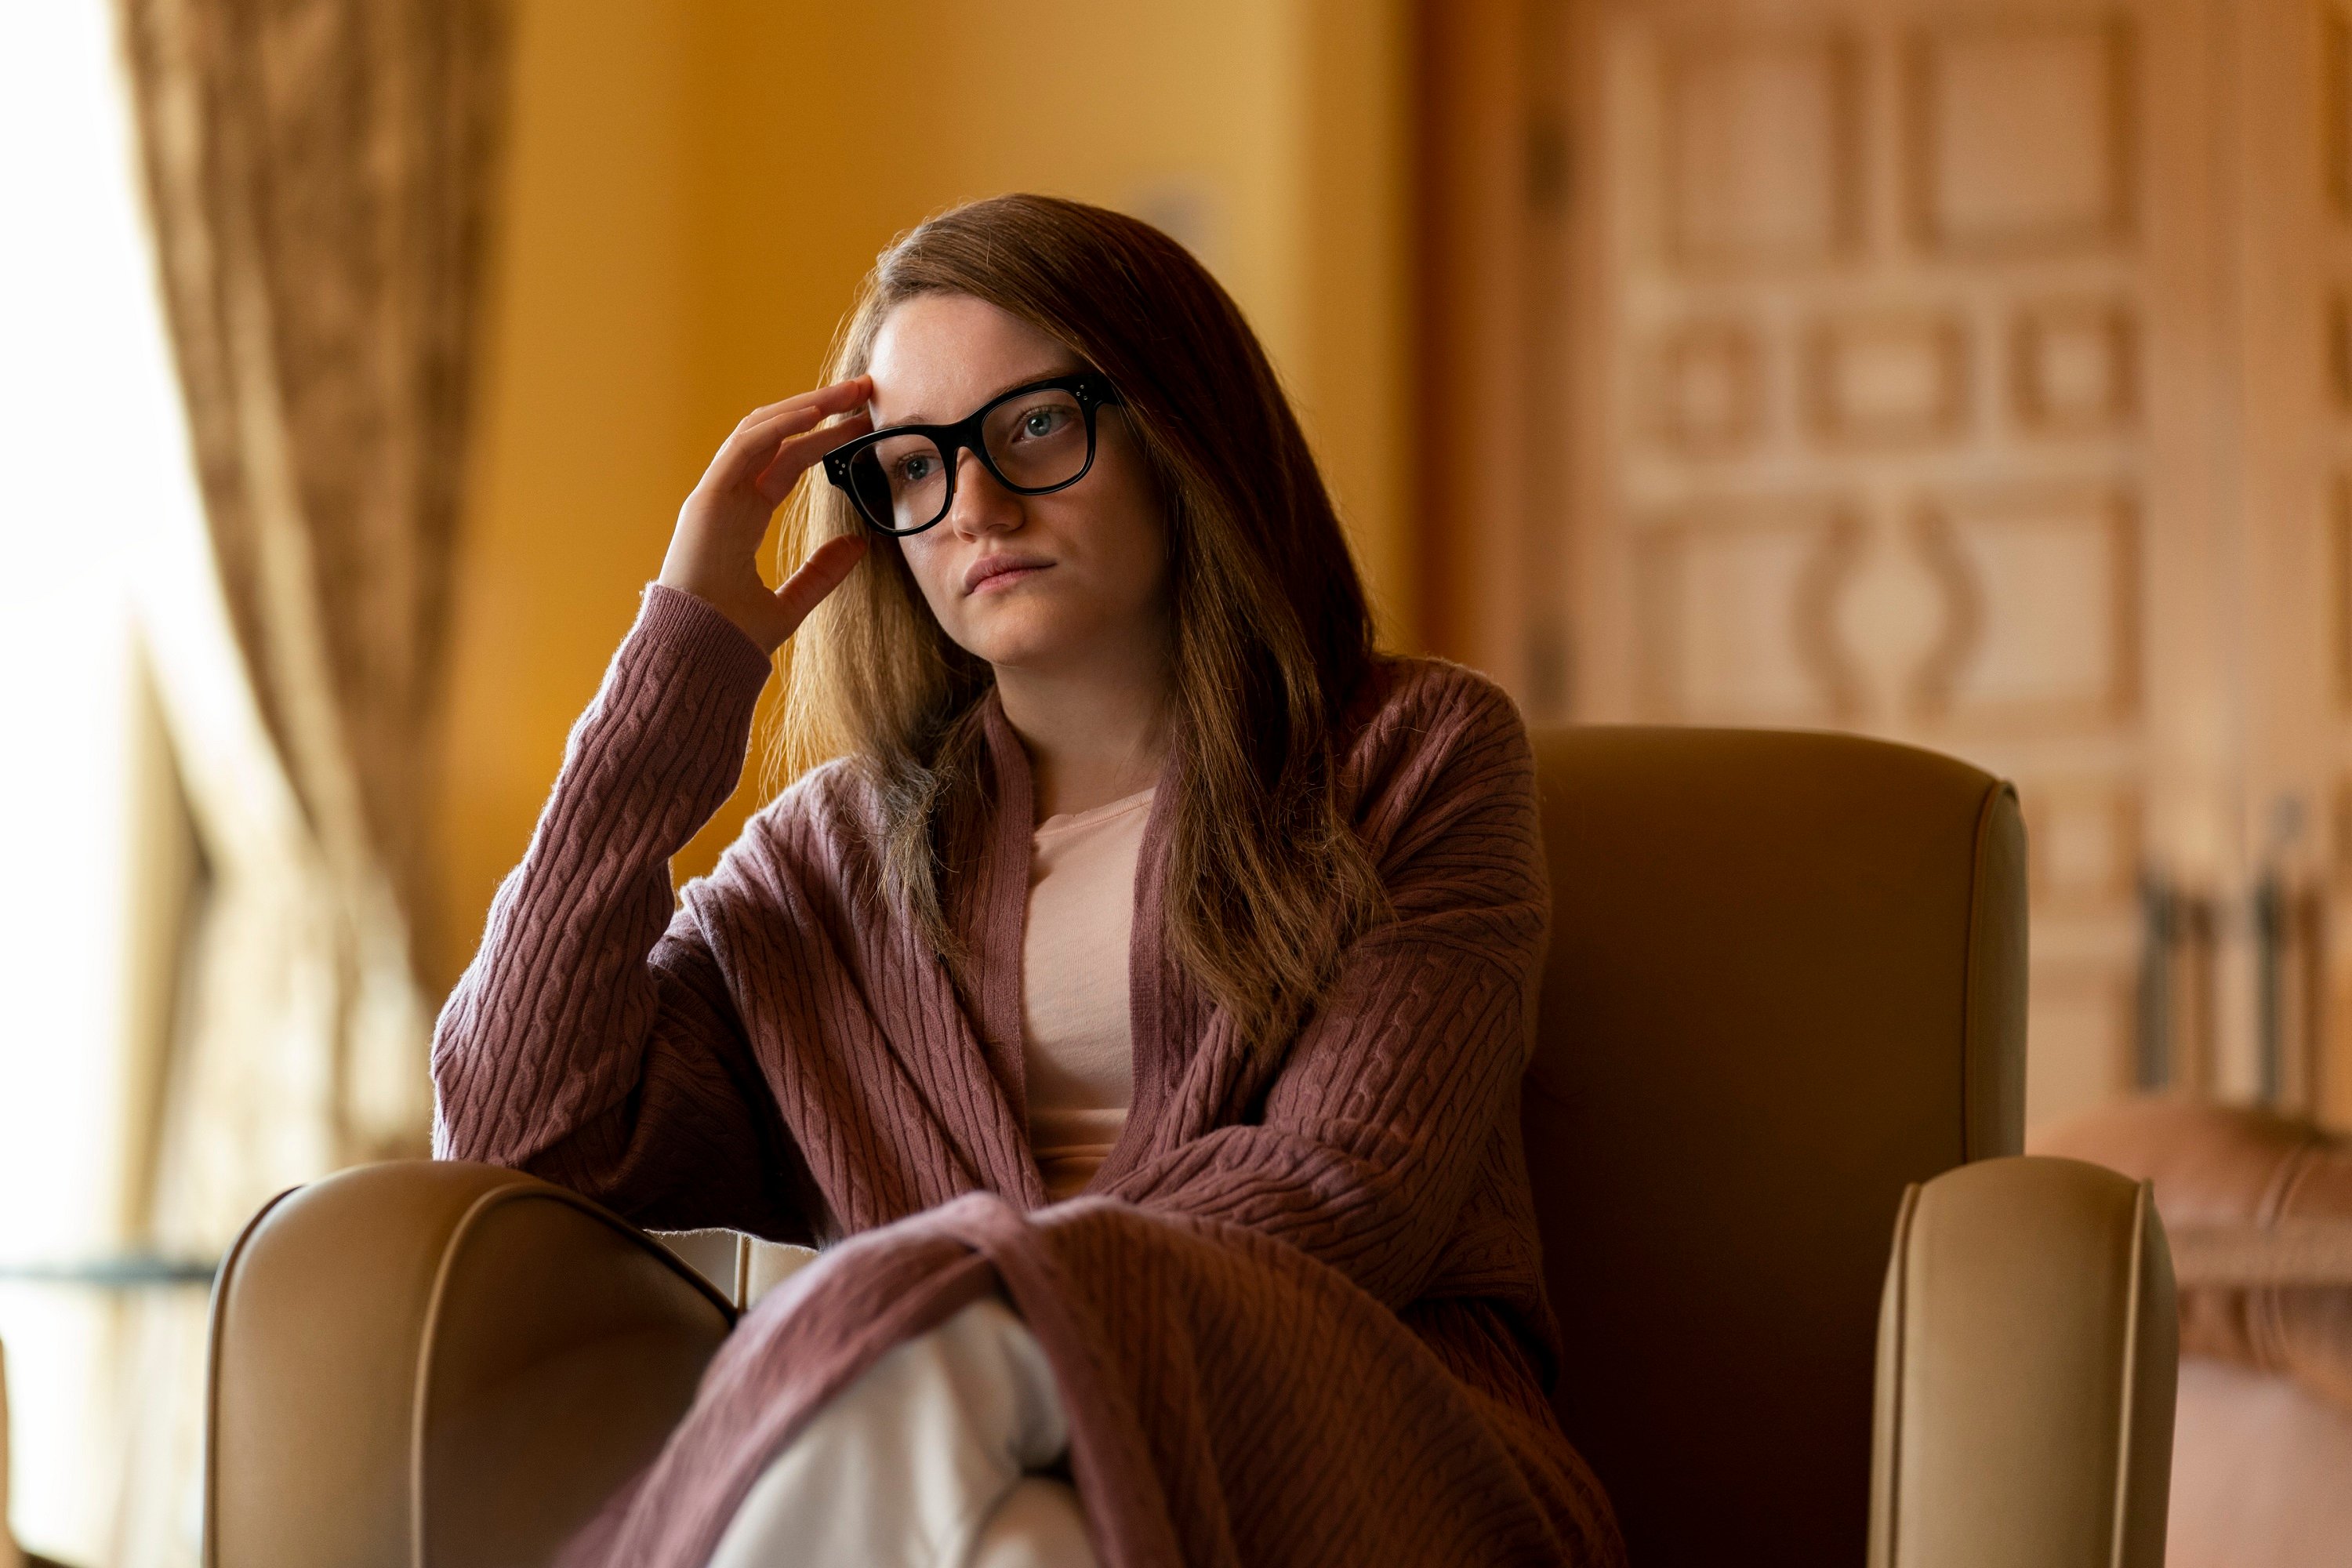 'Inventing Anna' cast member Julia Garner sits in a chair holding her glasses while looking upset as Anna Sorokin (Delvey)